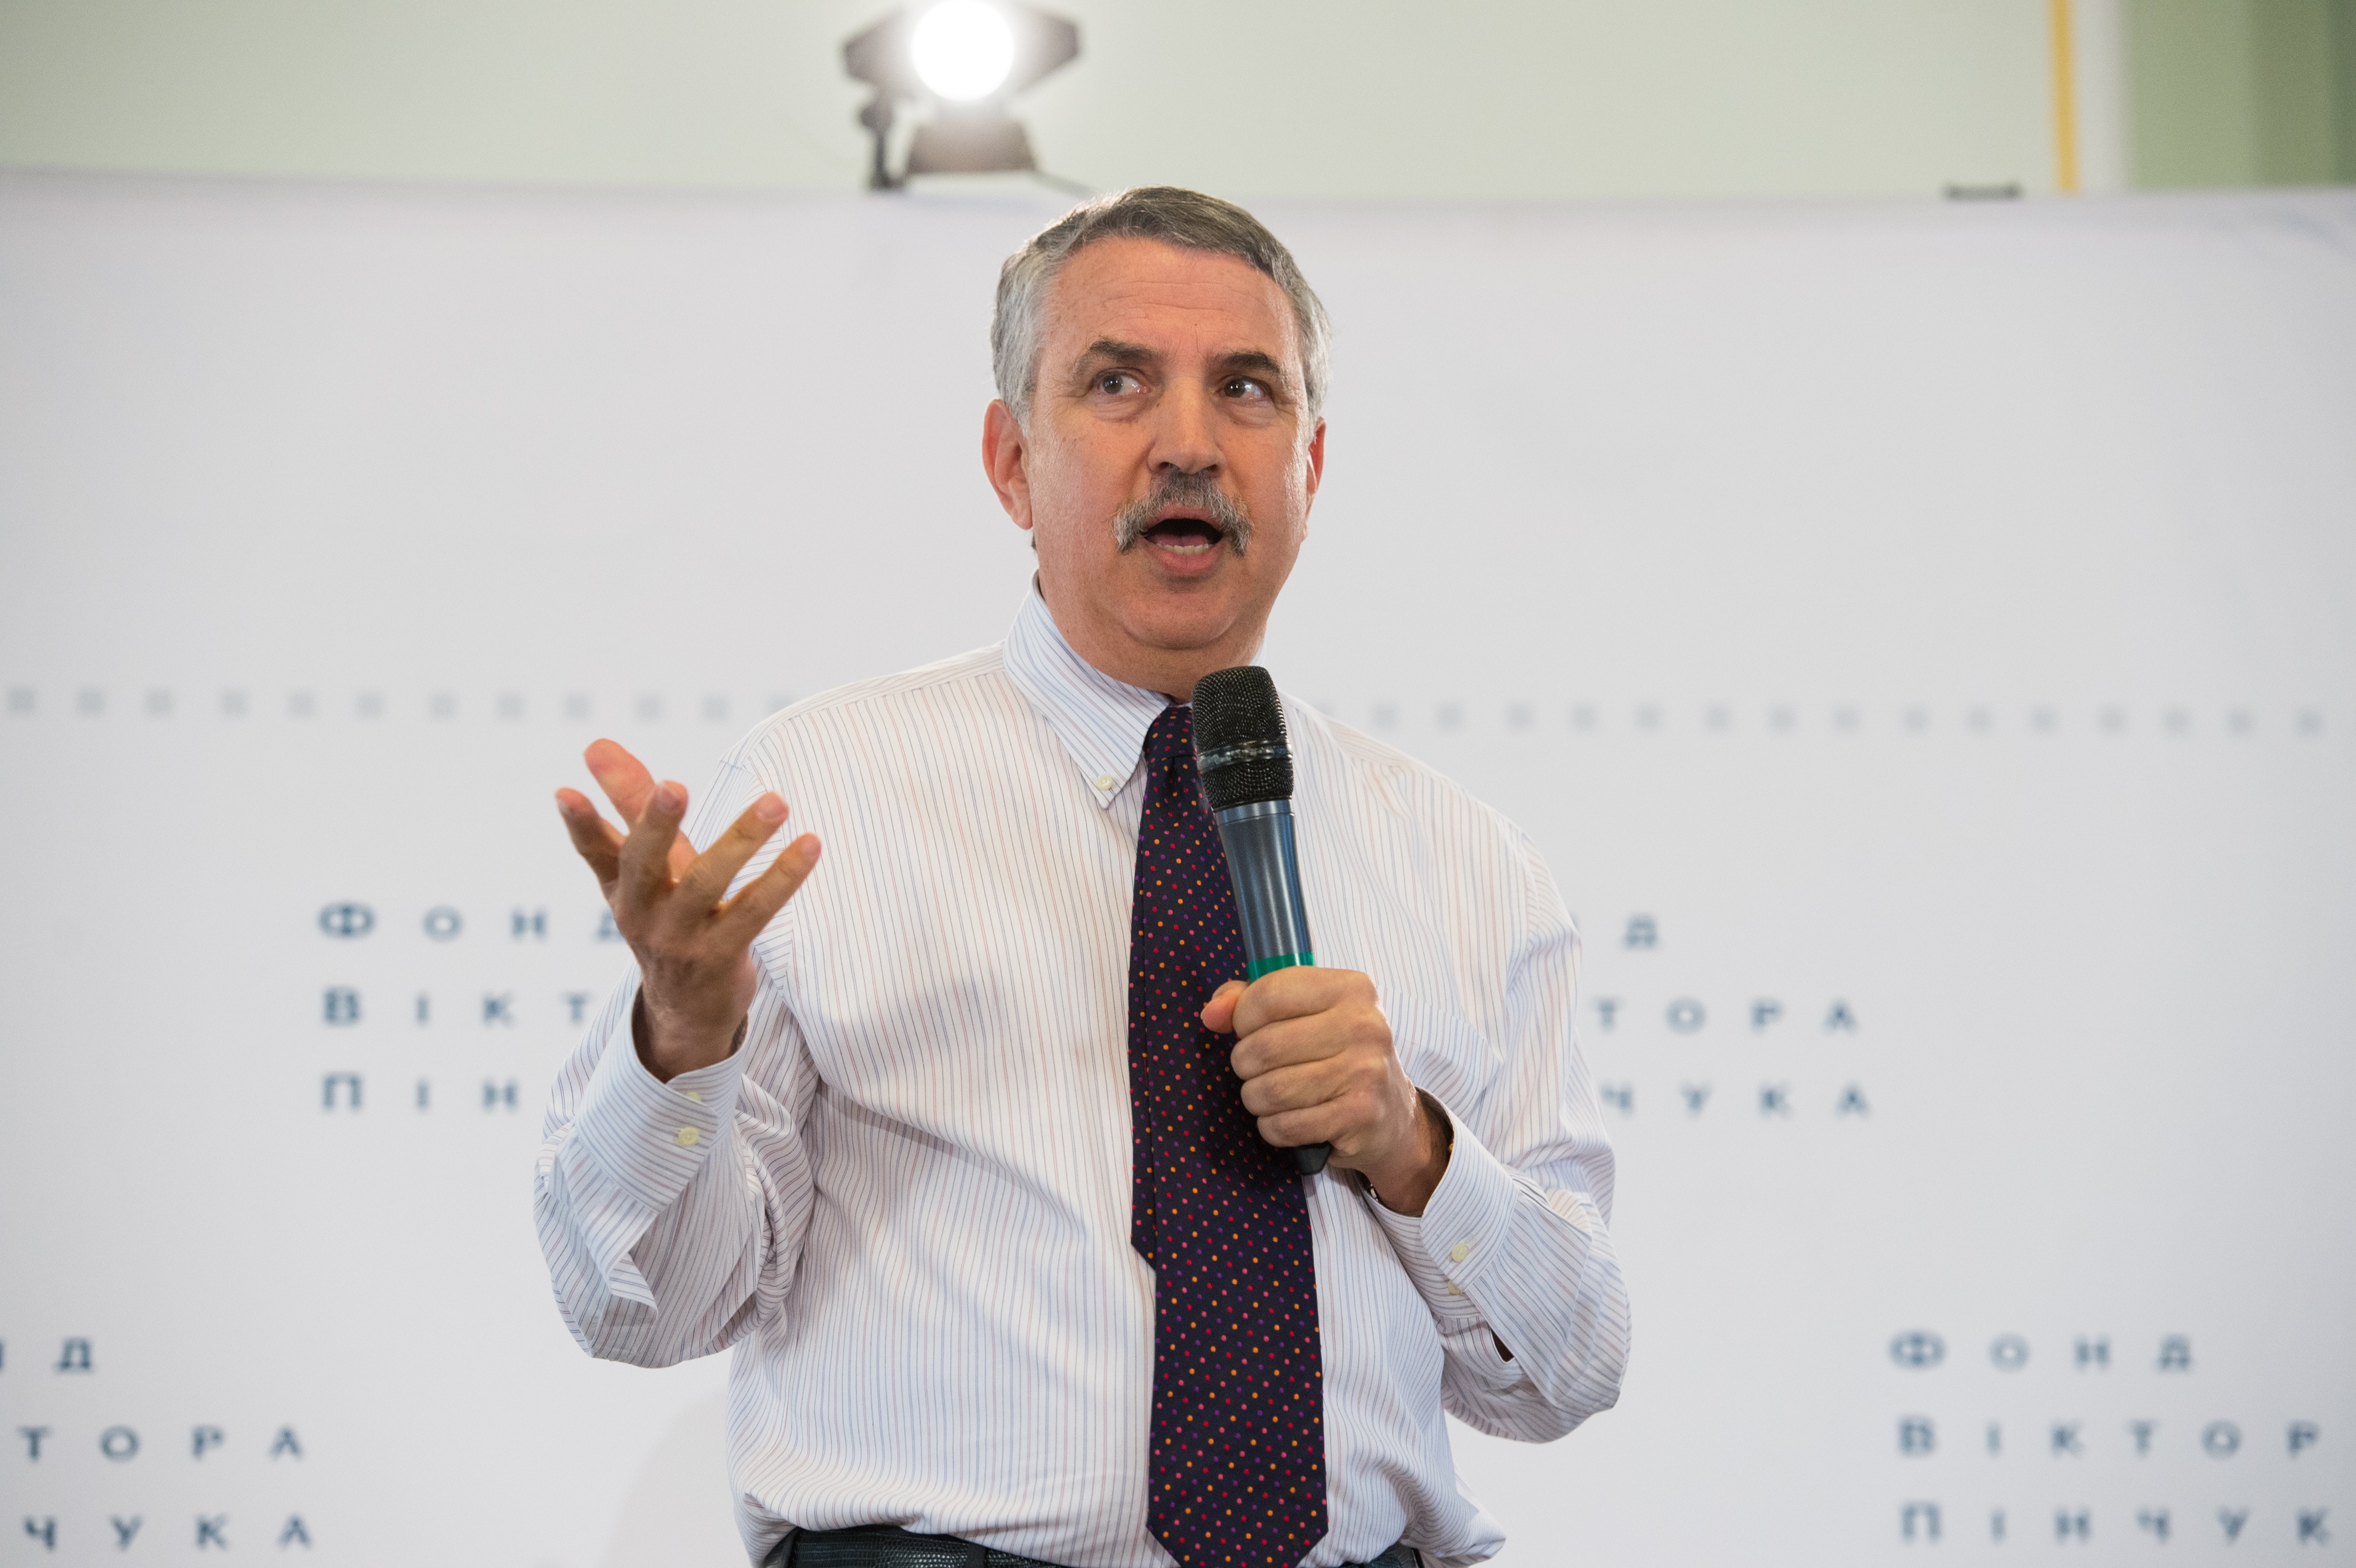 Thomas Friedman Public Lecture “A Brief Theory of Everything”